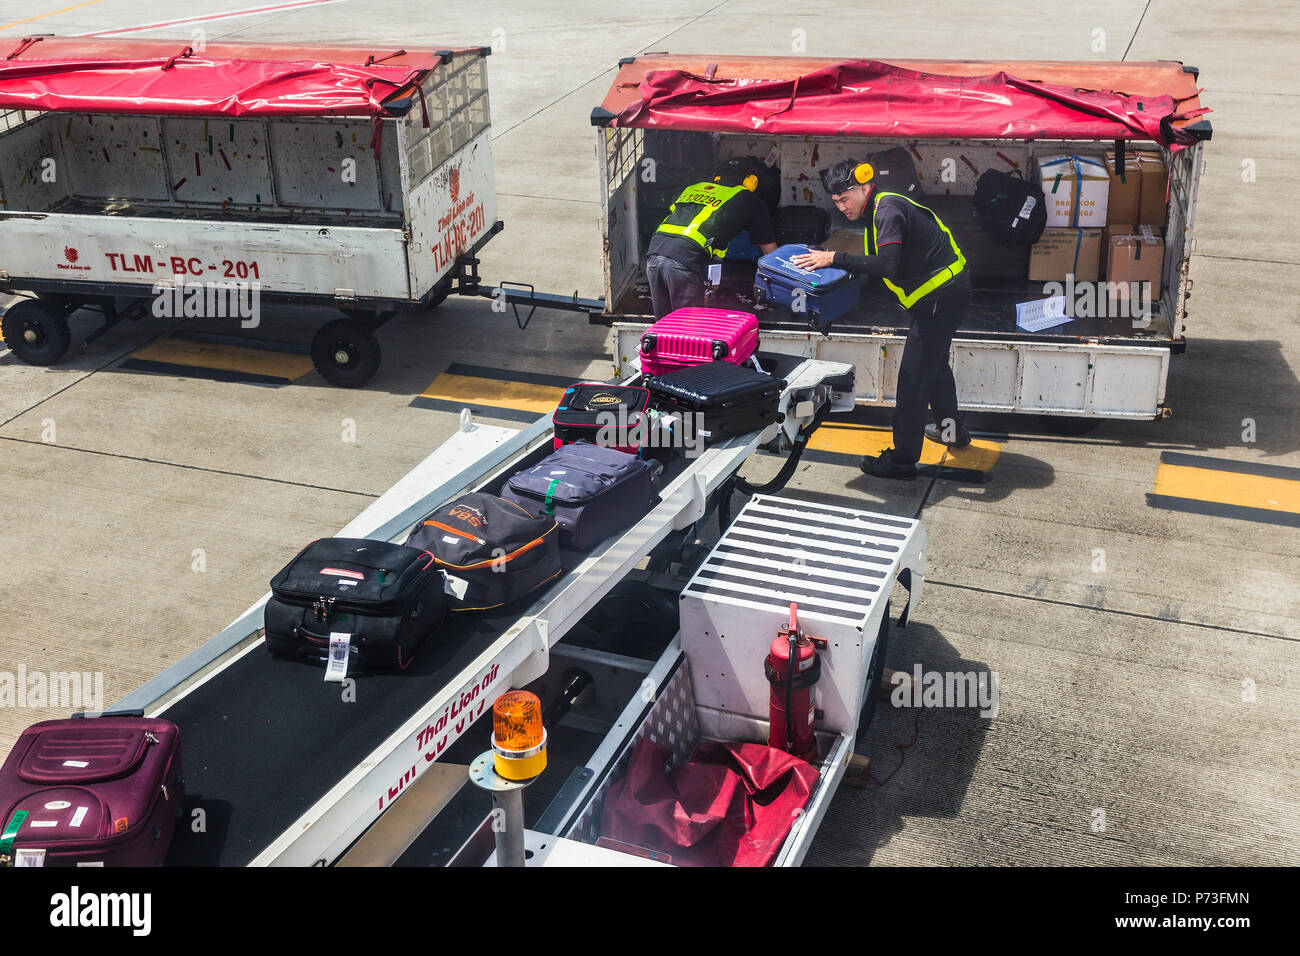 CHIANG MAI, THAILAND - 28 June 2018 - Thai ground staff load passenger luggages on the airplane through the conveyor on 28, 2018 at Chia Stock - Alamy